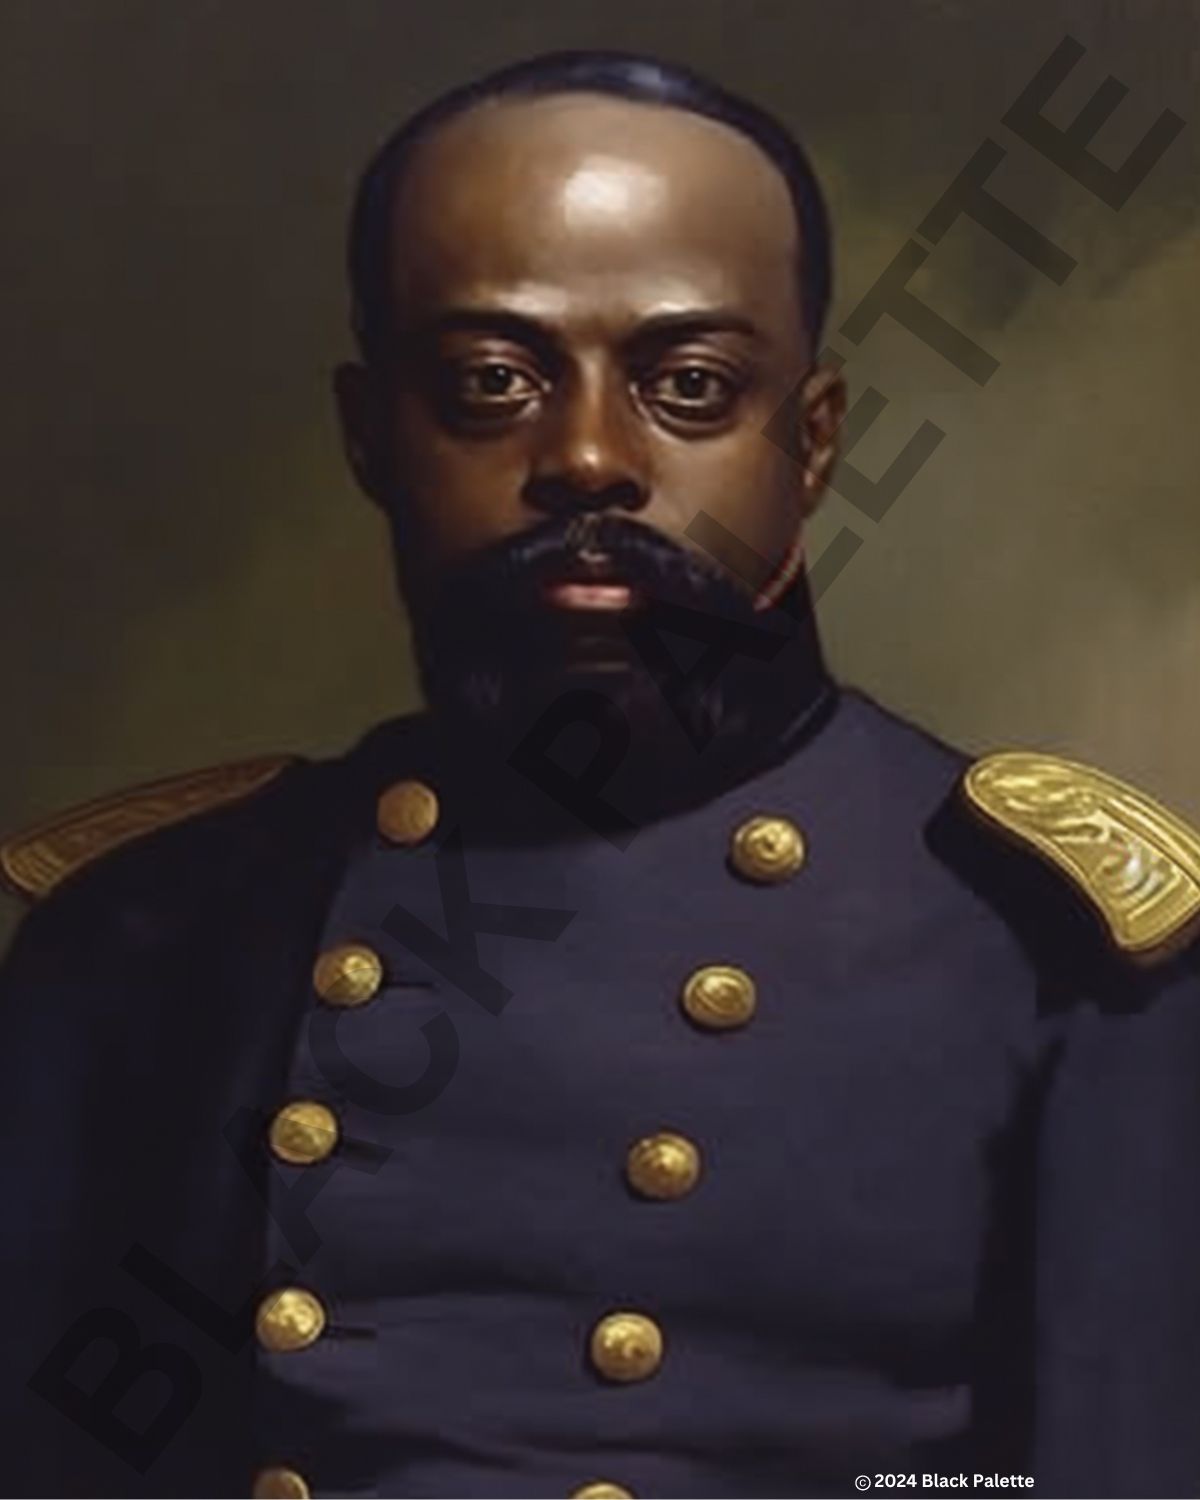 Portrait of Sgt. William H. Carney, the valiant Civil War hero and Medal of Honor recipient.